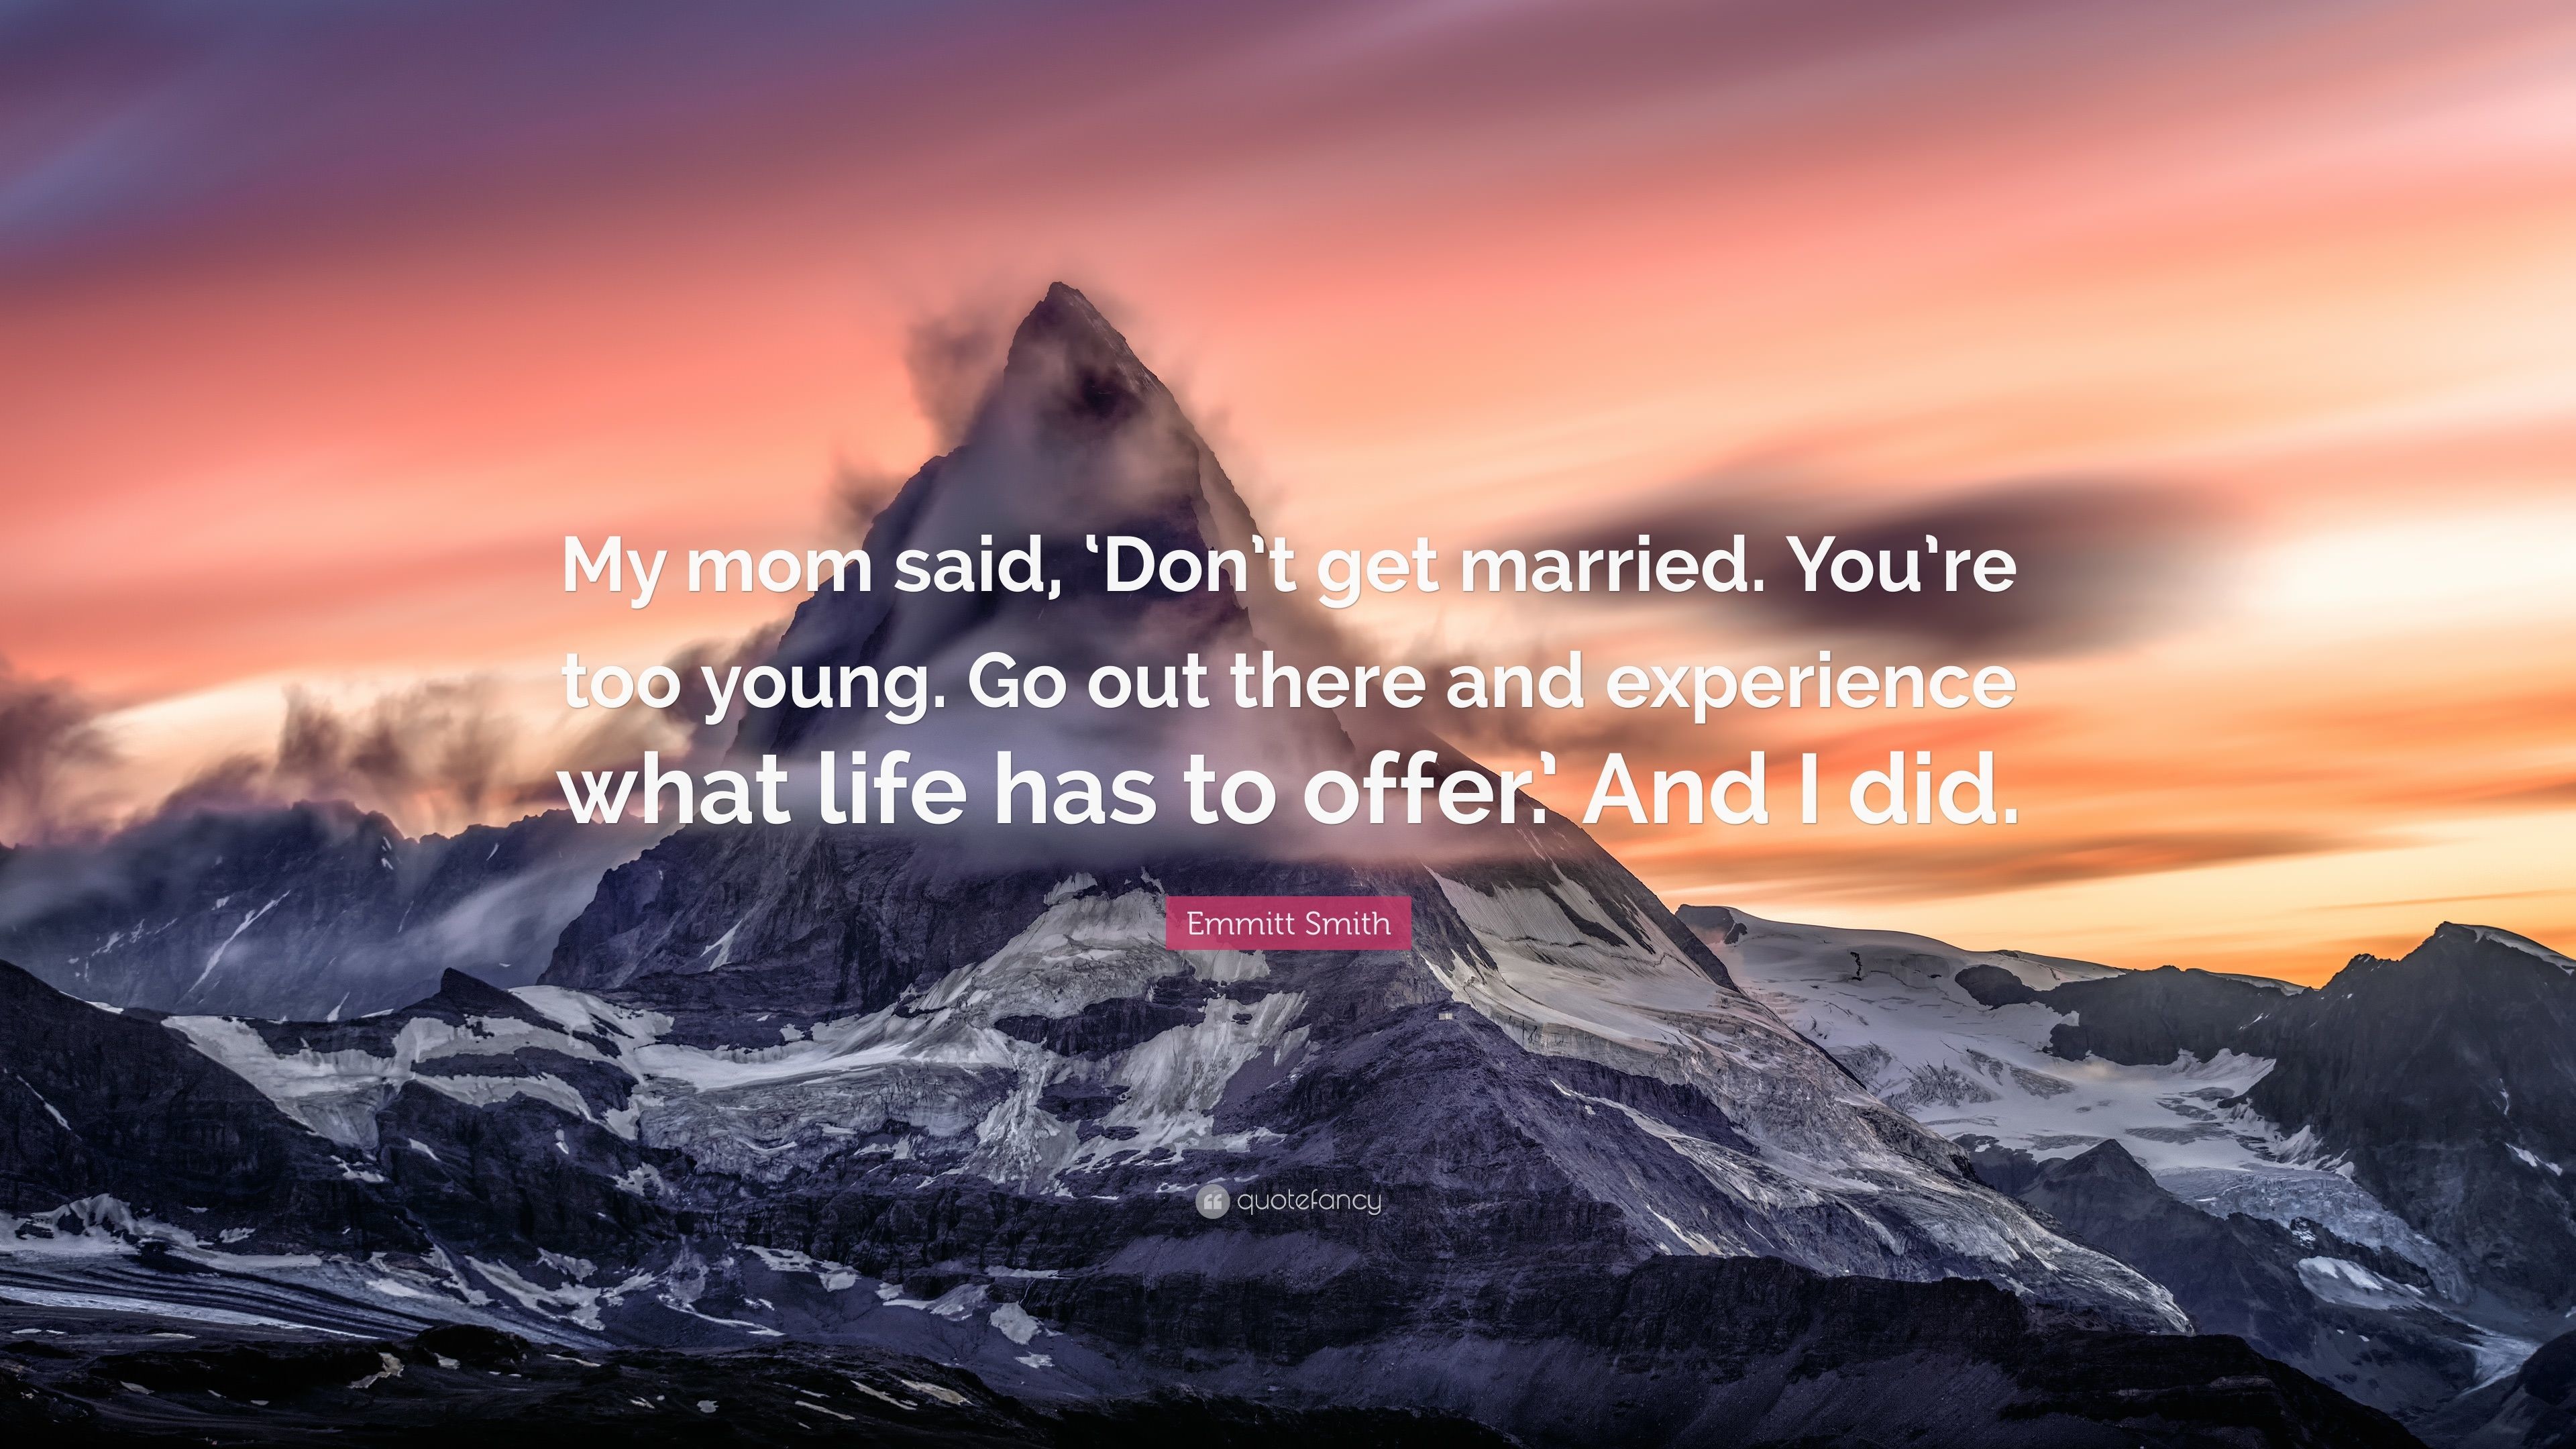 3840x2160 Emmitt Smith Quote: “My mom said, 'Don't get married.